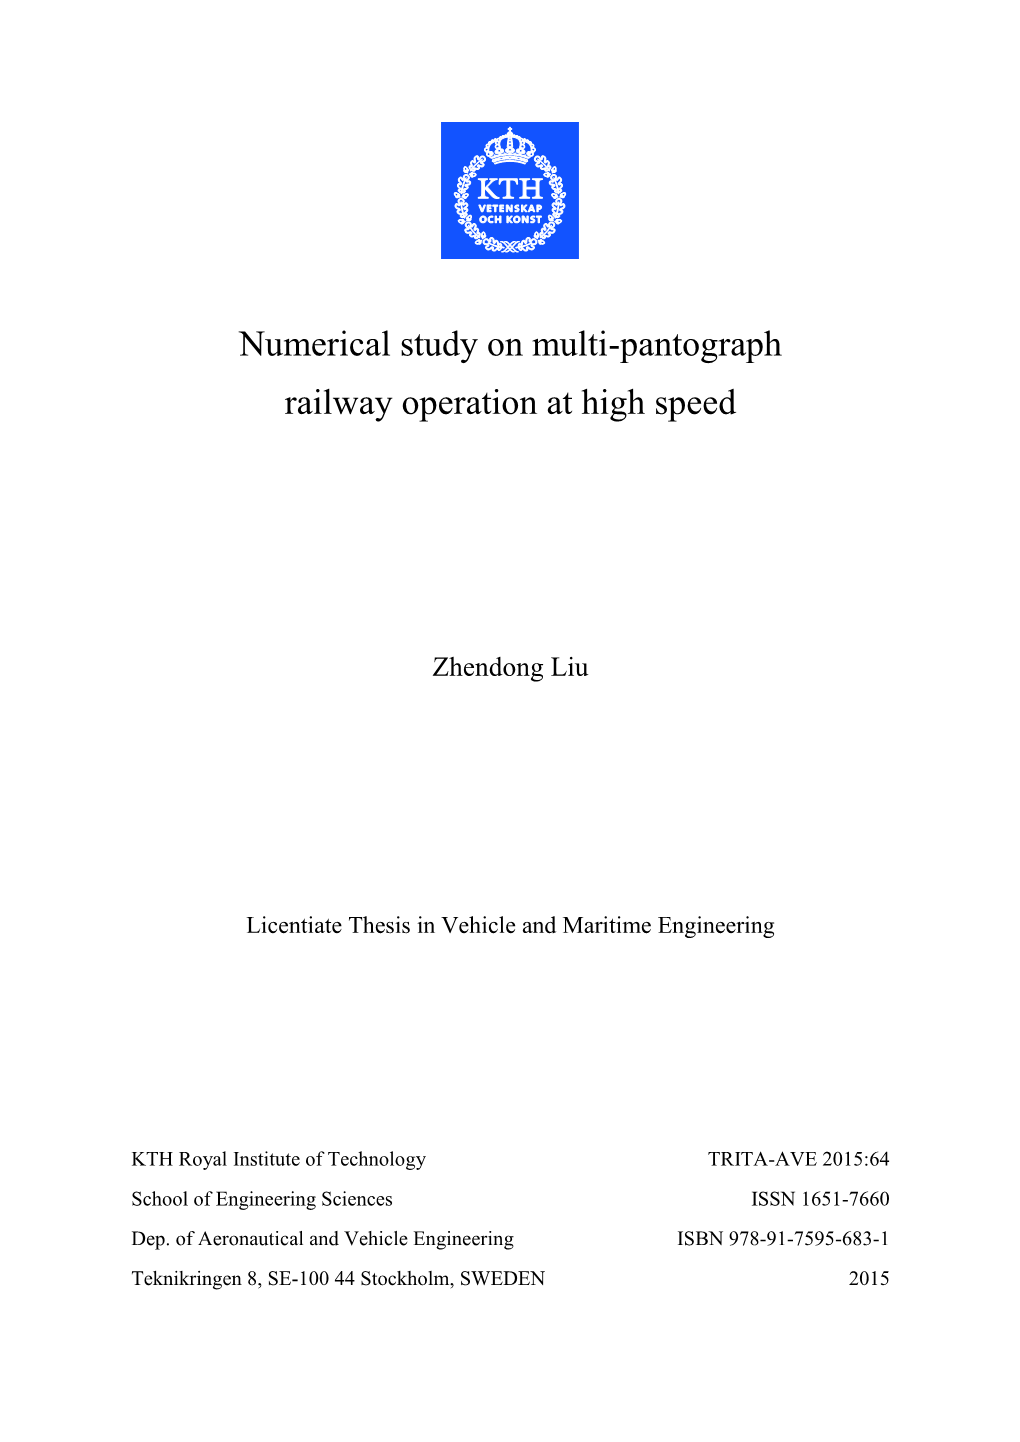 Numerical Study on Multi-Pantograph Railway Operation at High Speed